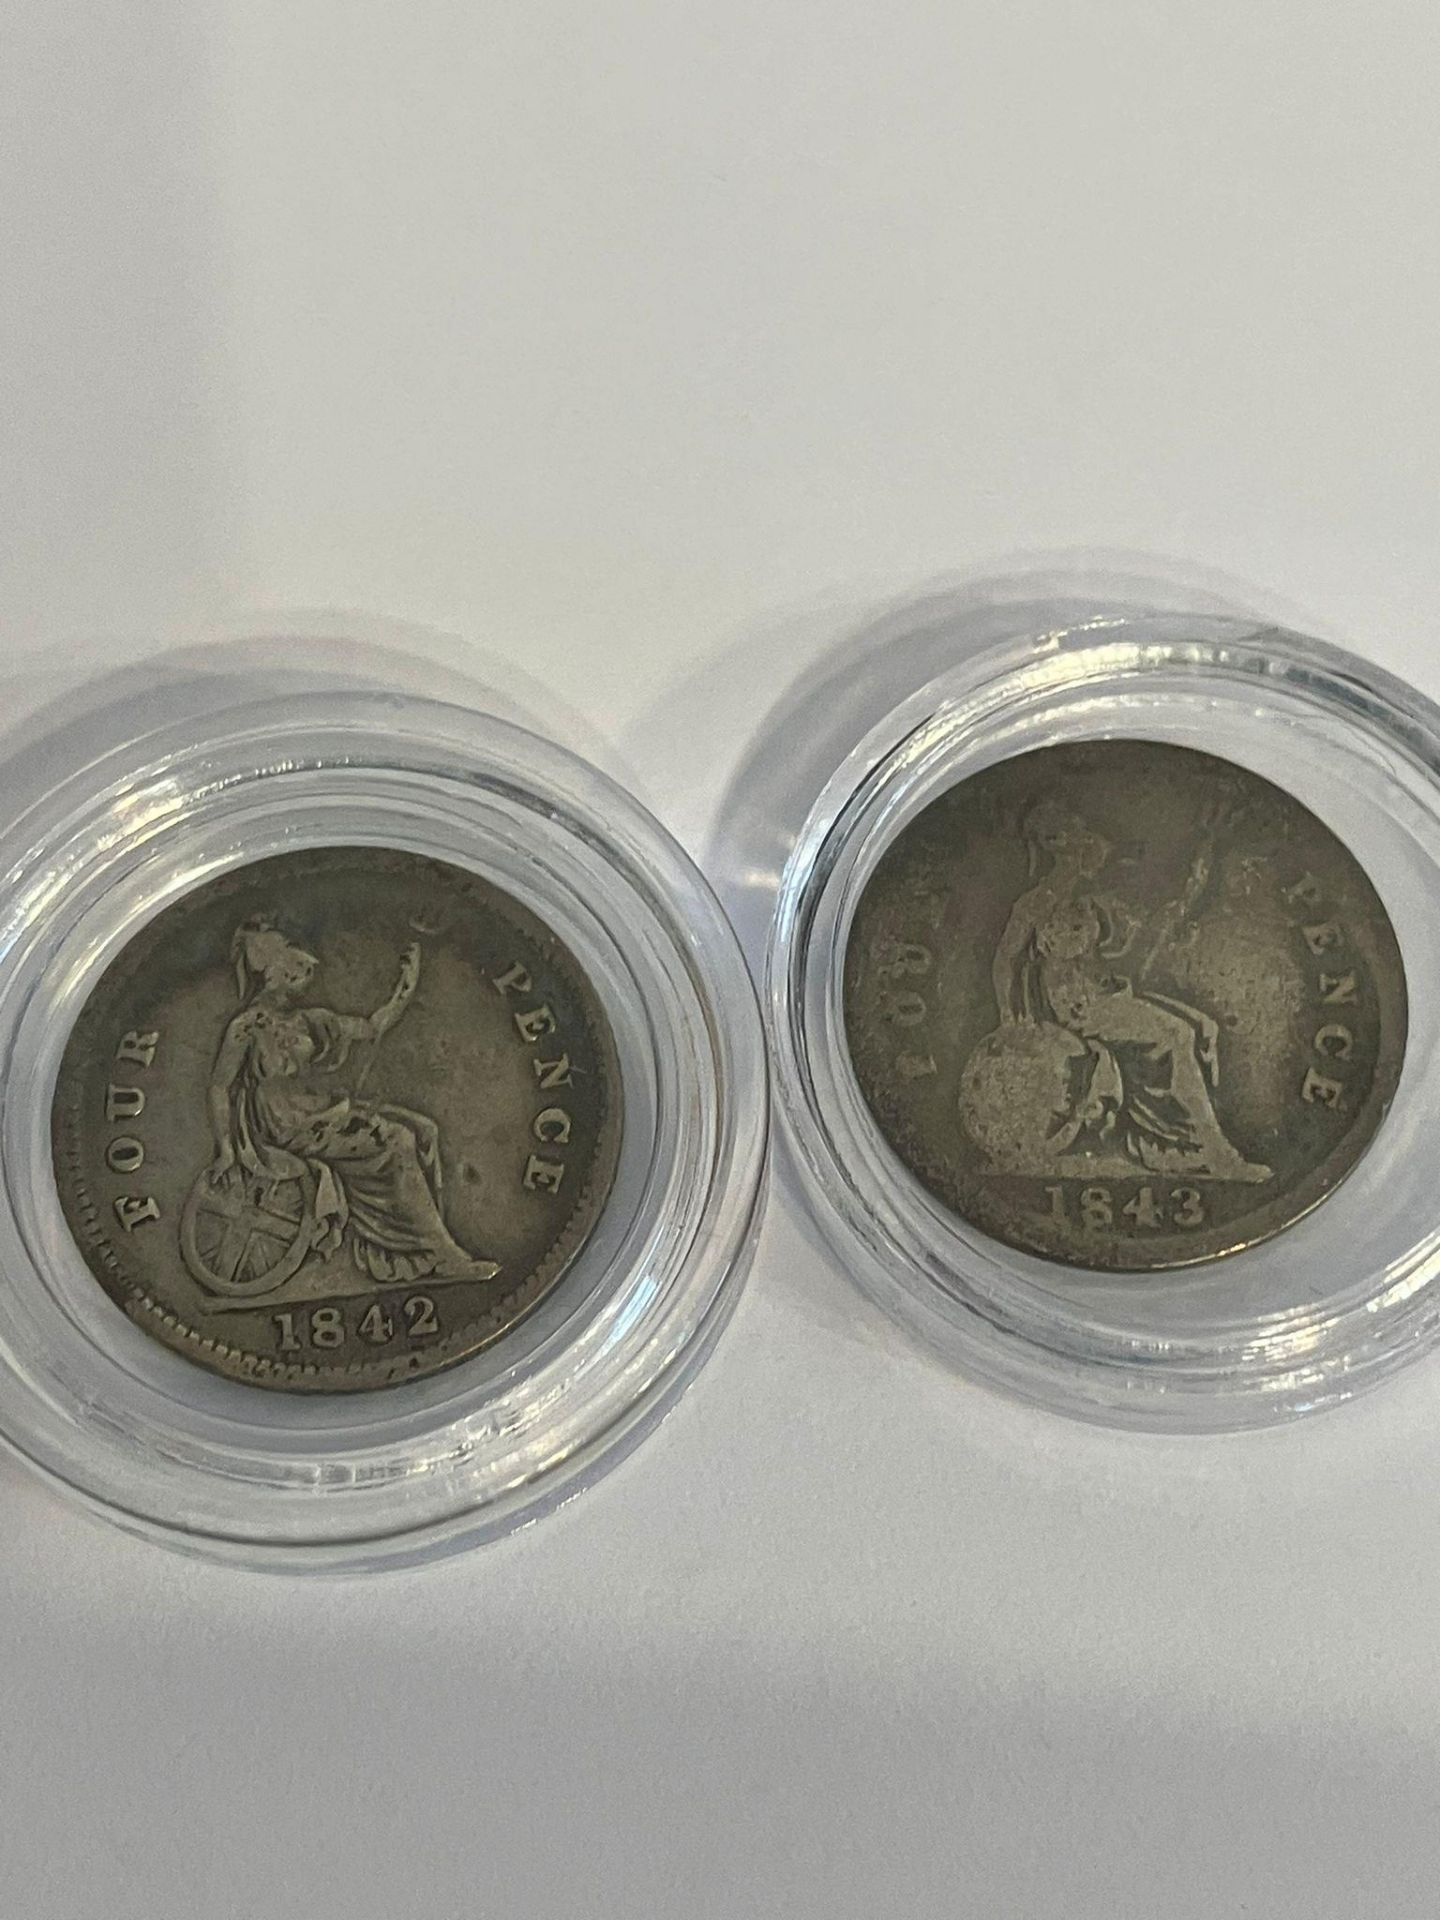 2 x Victorian SILVER GROATS (four penny coins). Consecutive years 1842 and 1843. Fine condition.